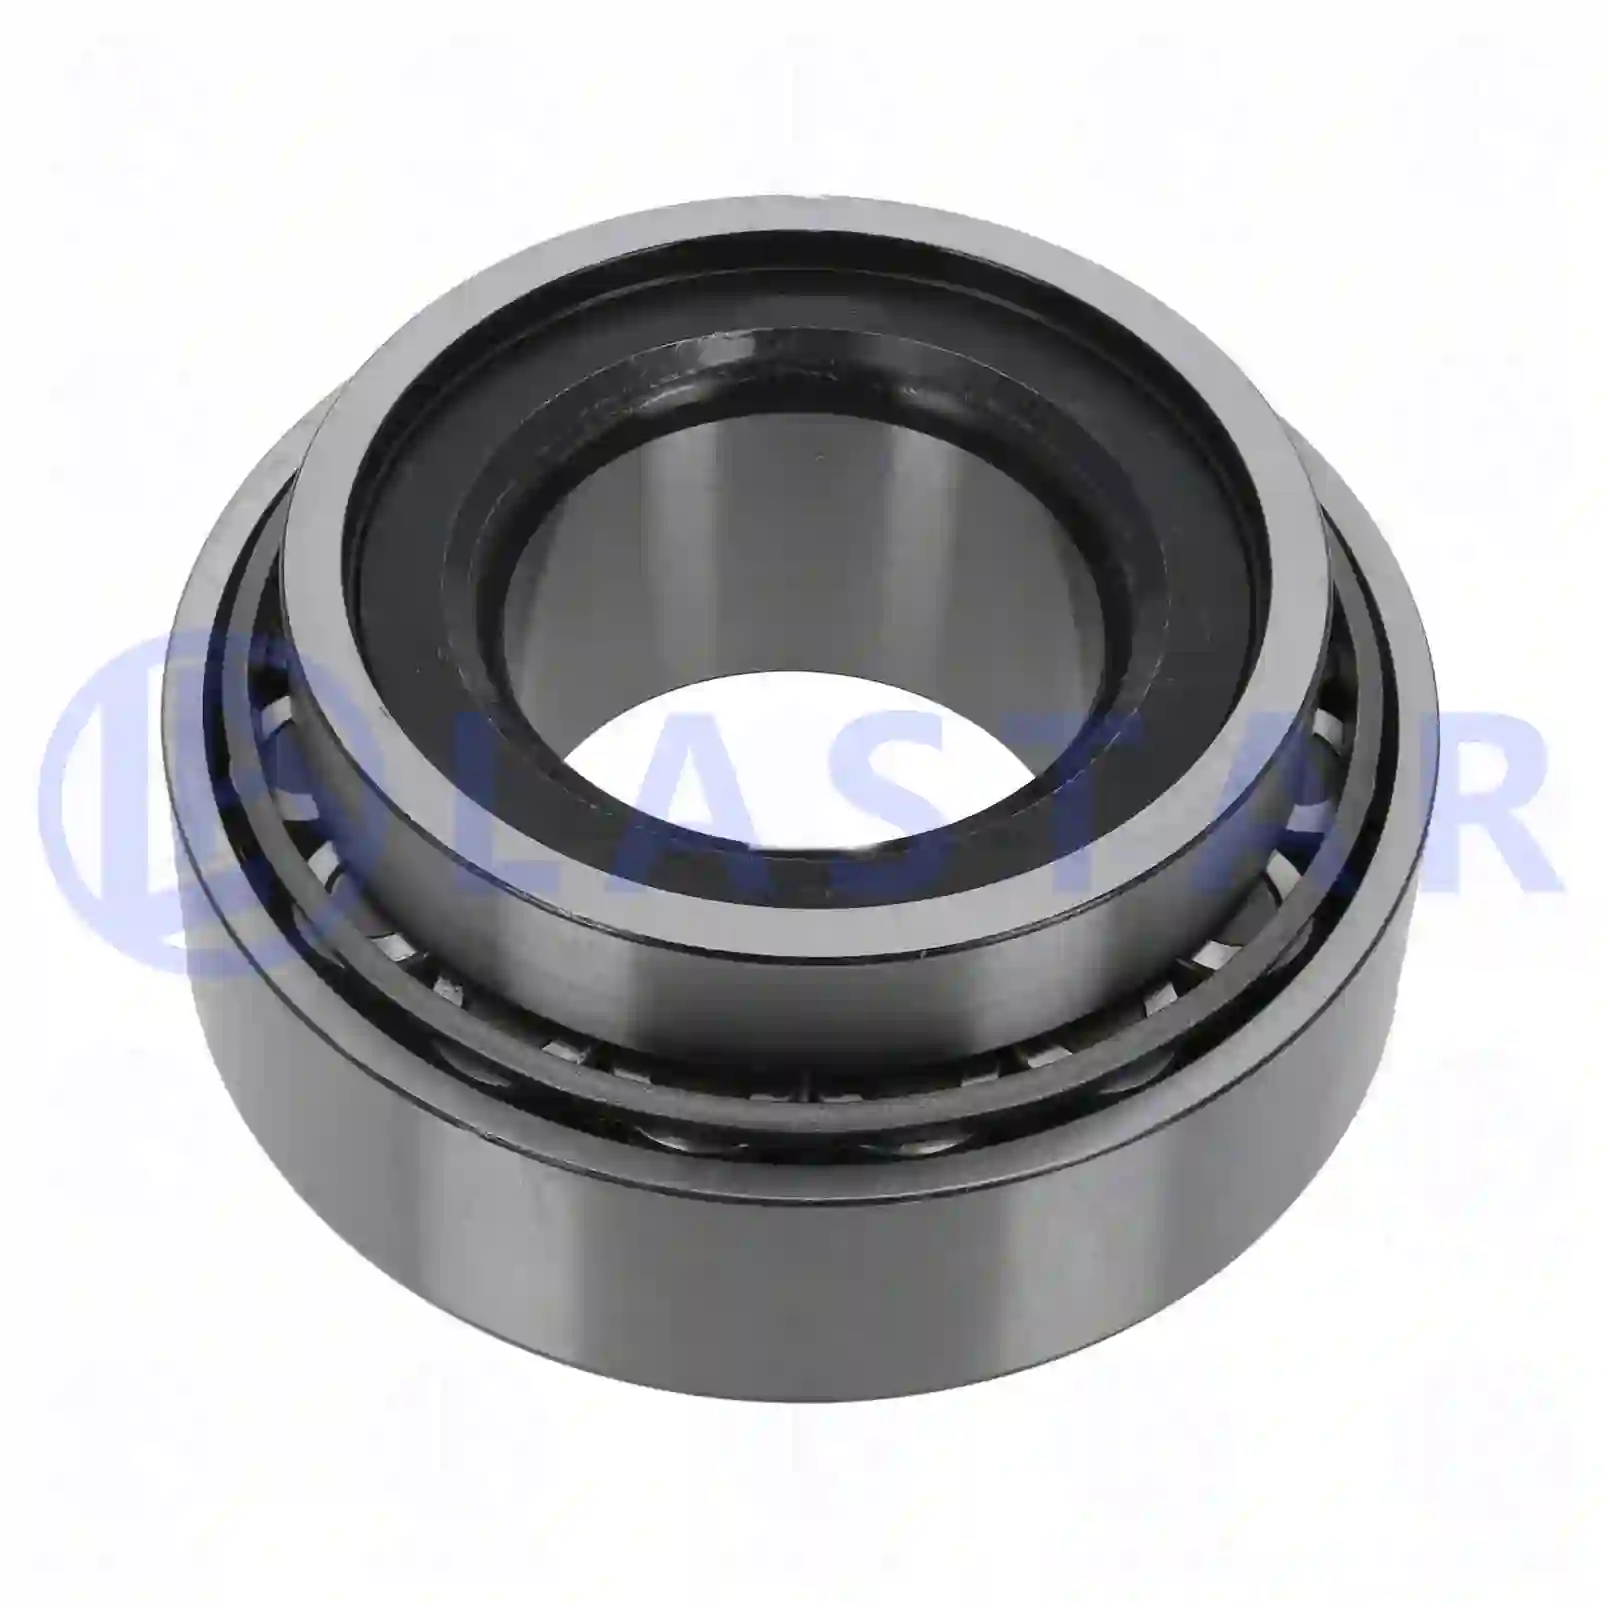 Hub Tapered roller bearing, la no: 77726313 ,  oem no:0139814305, 0099810805, 0099816405, 0139814205, 0139814305, 0139816405, 3098132, ZG02997-0008 Lastar Spare Part | Truck Spare Parts, Auotomotive Spare Parts